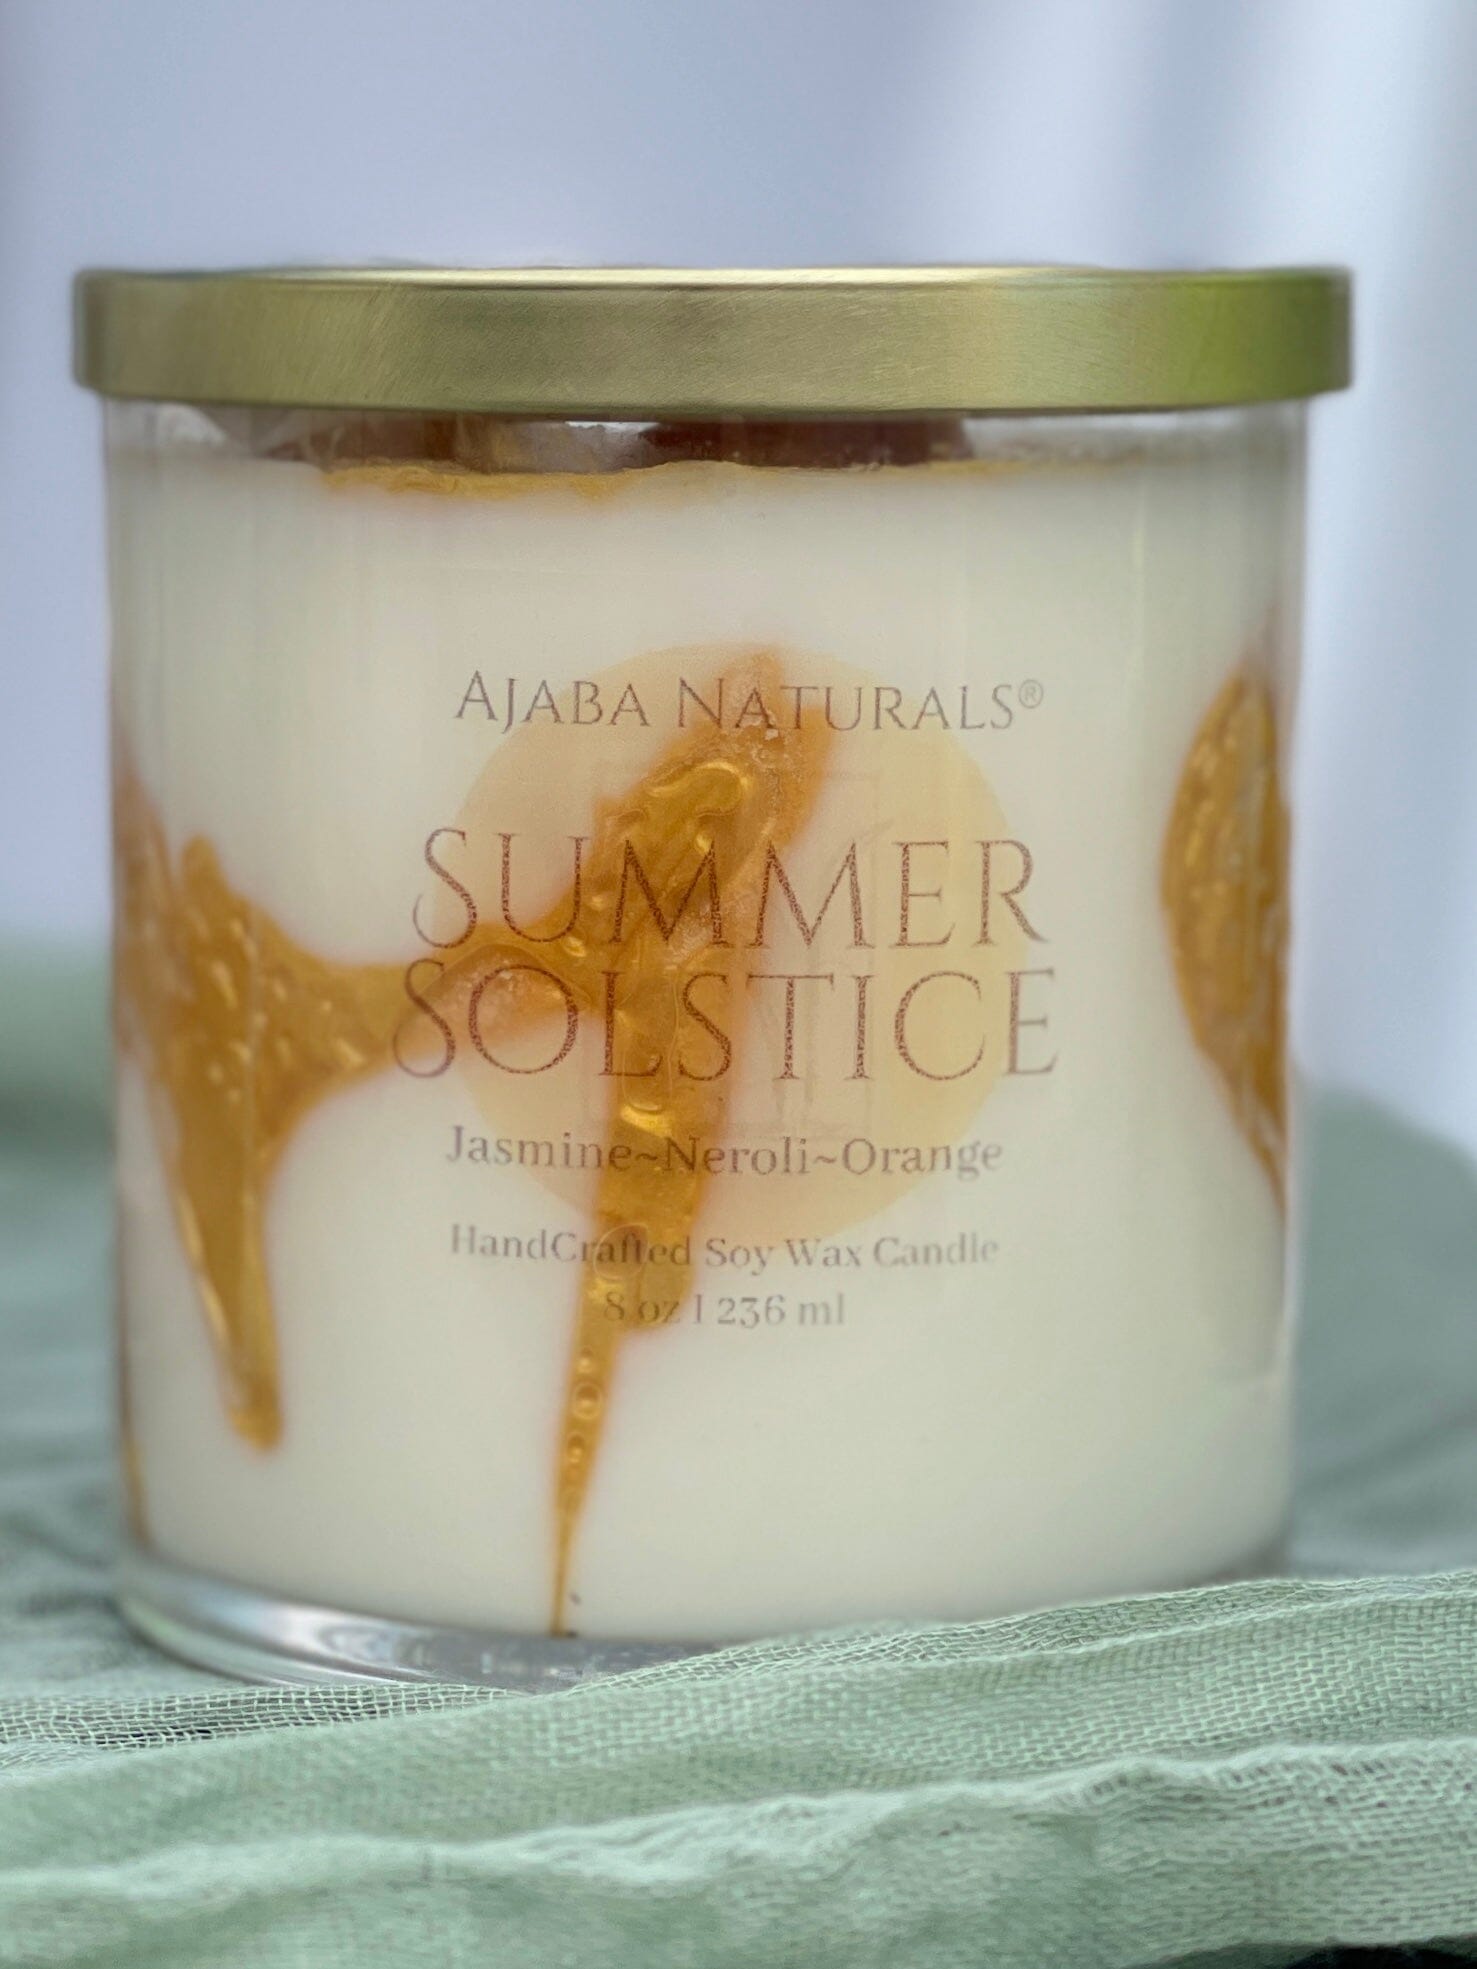 Summer Solstice Handcrafted Soy Wax Candle Candle AJABA NATURALS® 